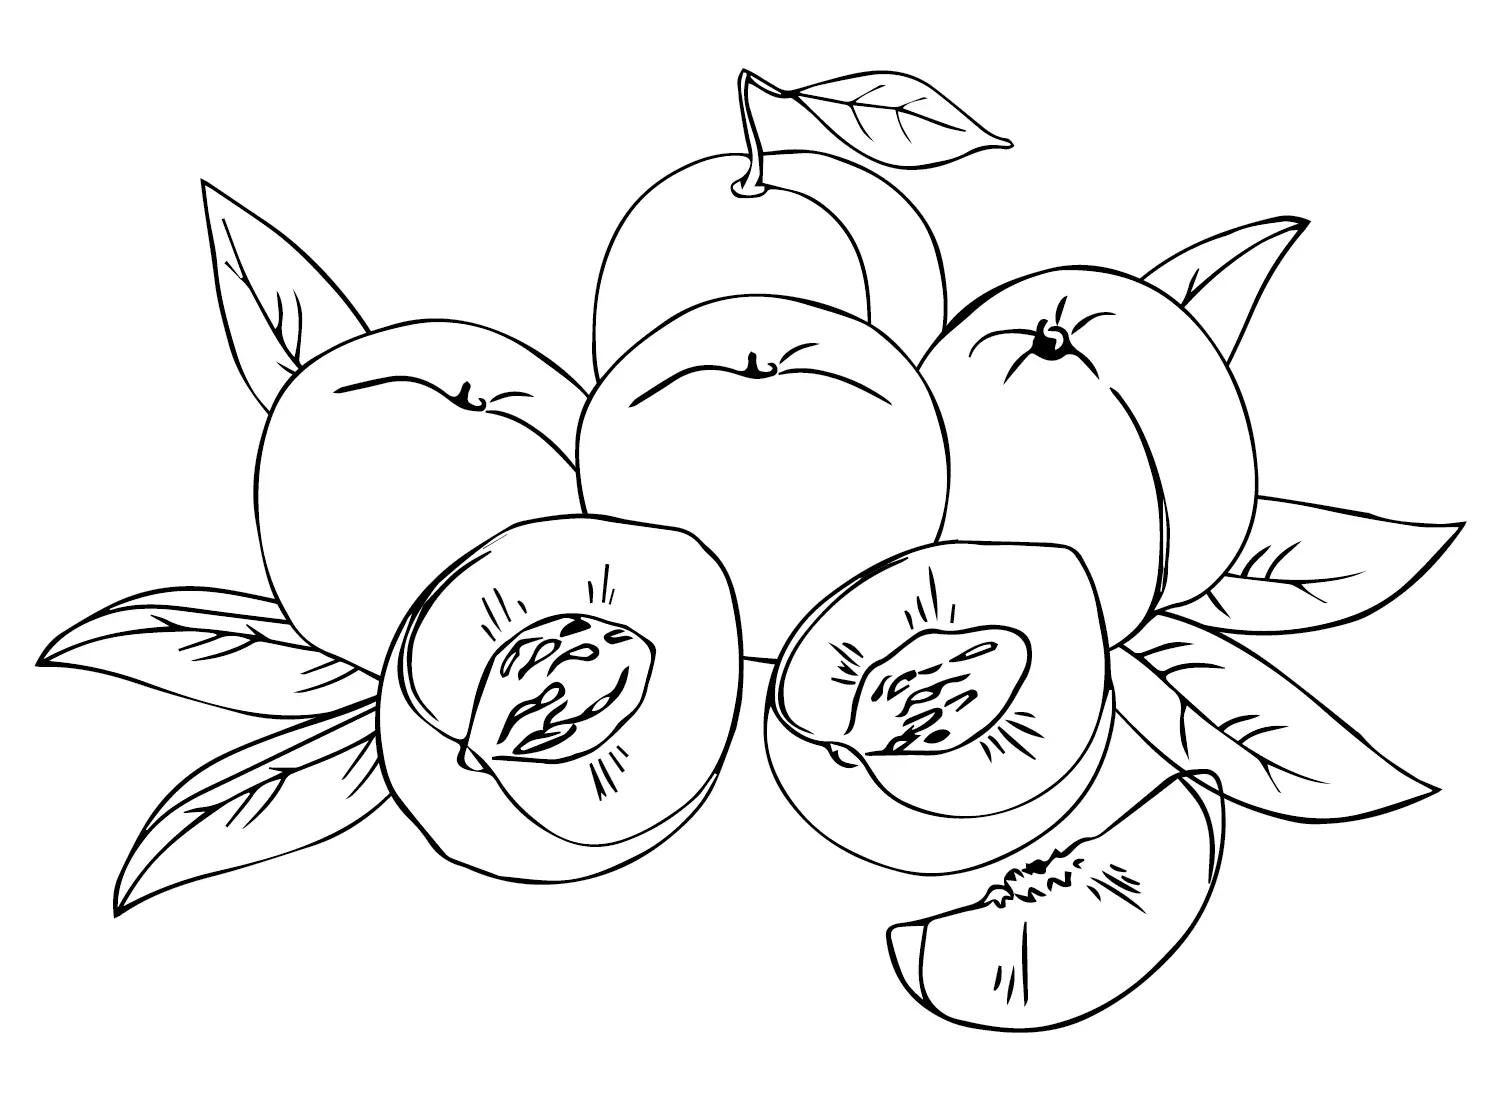 Nectarine Coloring Pages